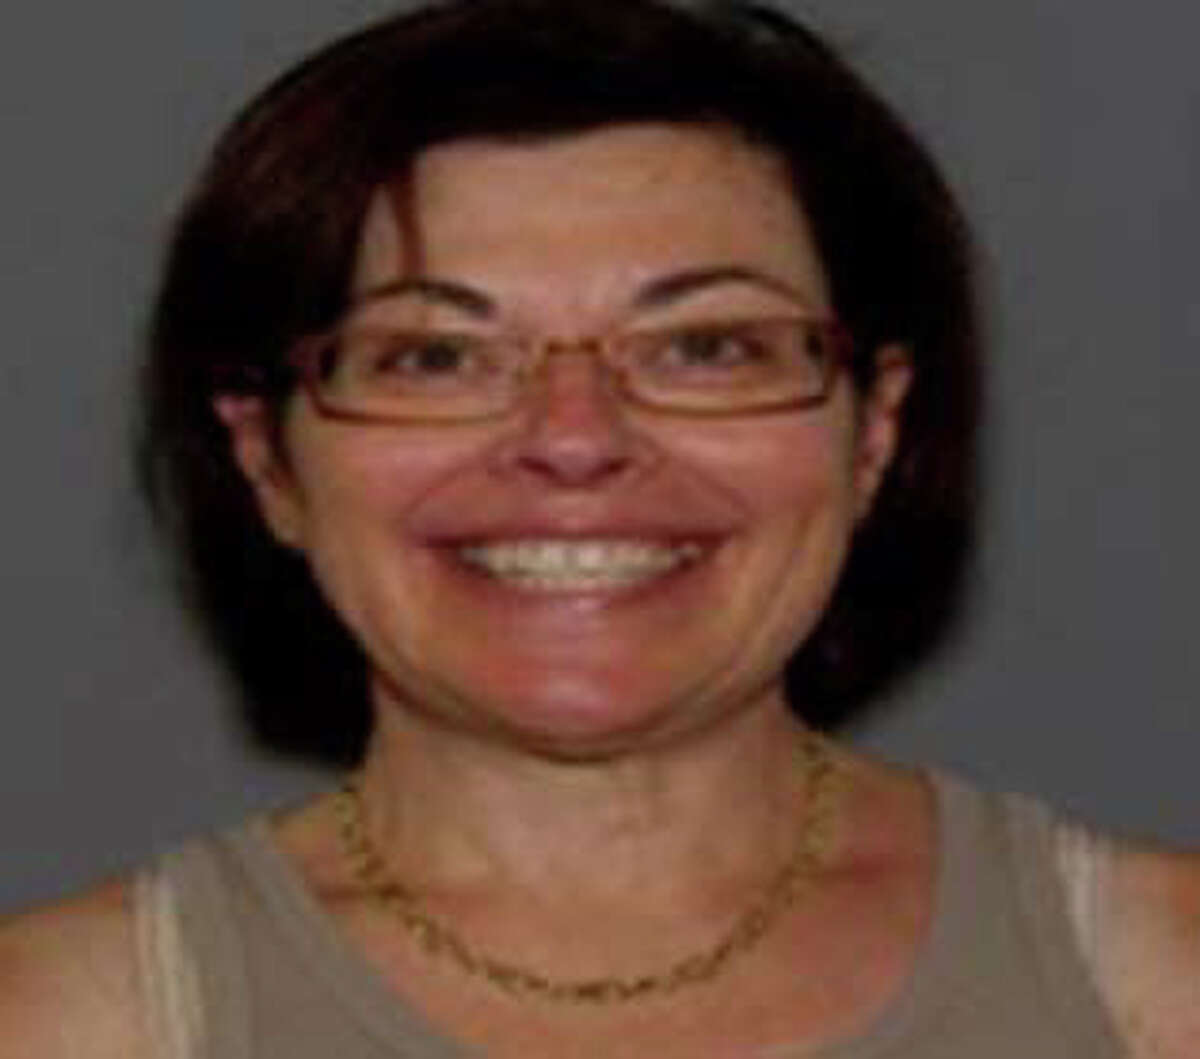 This photo of Nancy Salzman was submitted as evidence in the federal trial of Keith Raniere. (U.S. Department of Justice)